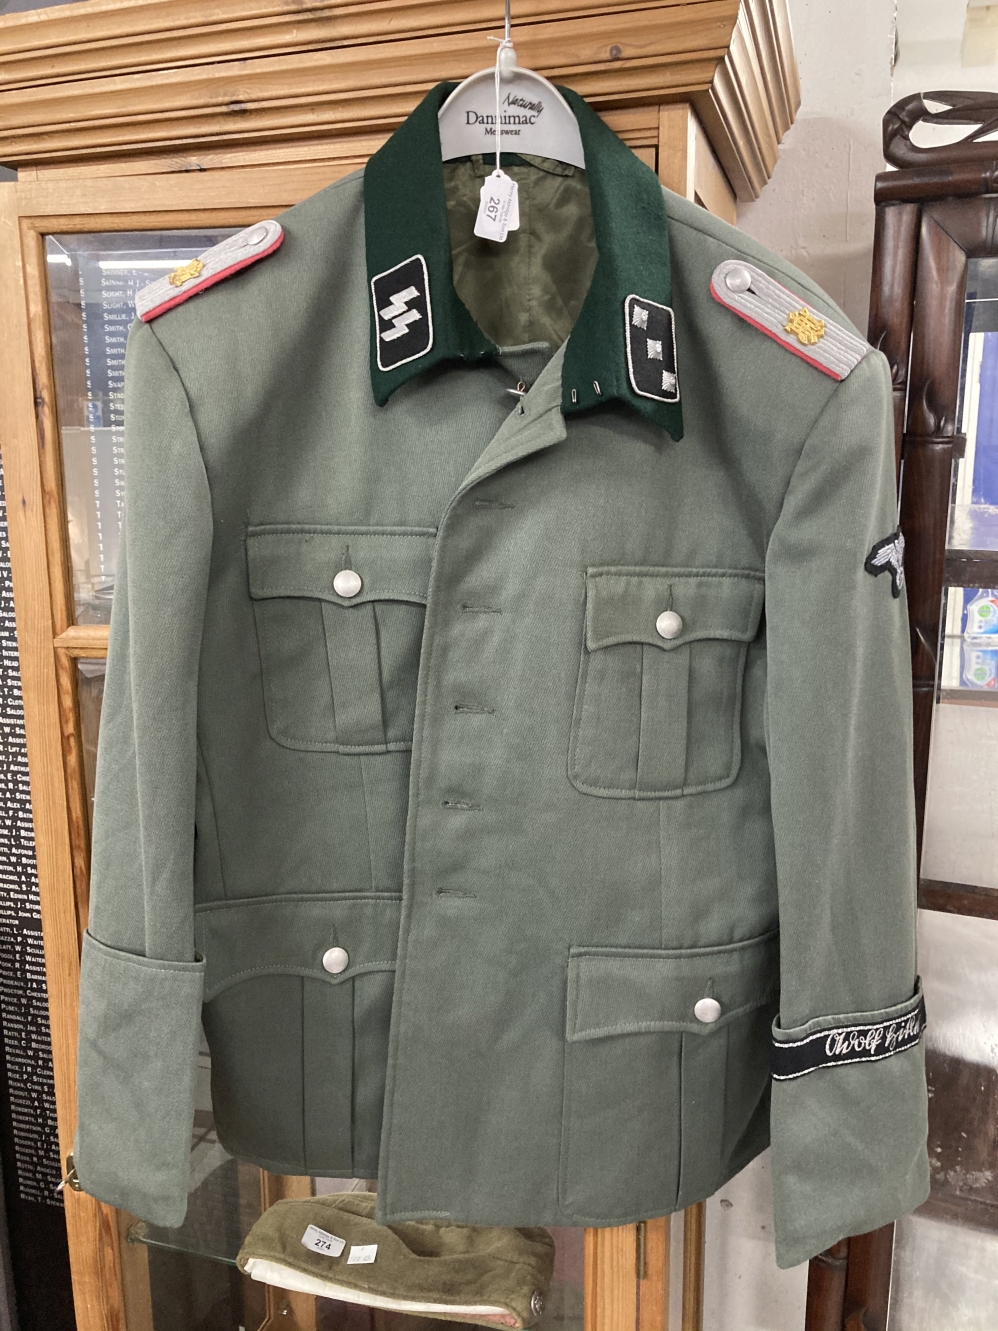 Militaria: WWII Waffen SS Officers service dress tunic, rank of Untersturmfuher in the Leibstandarte